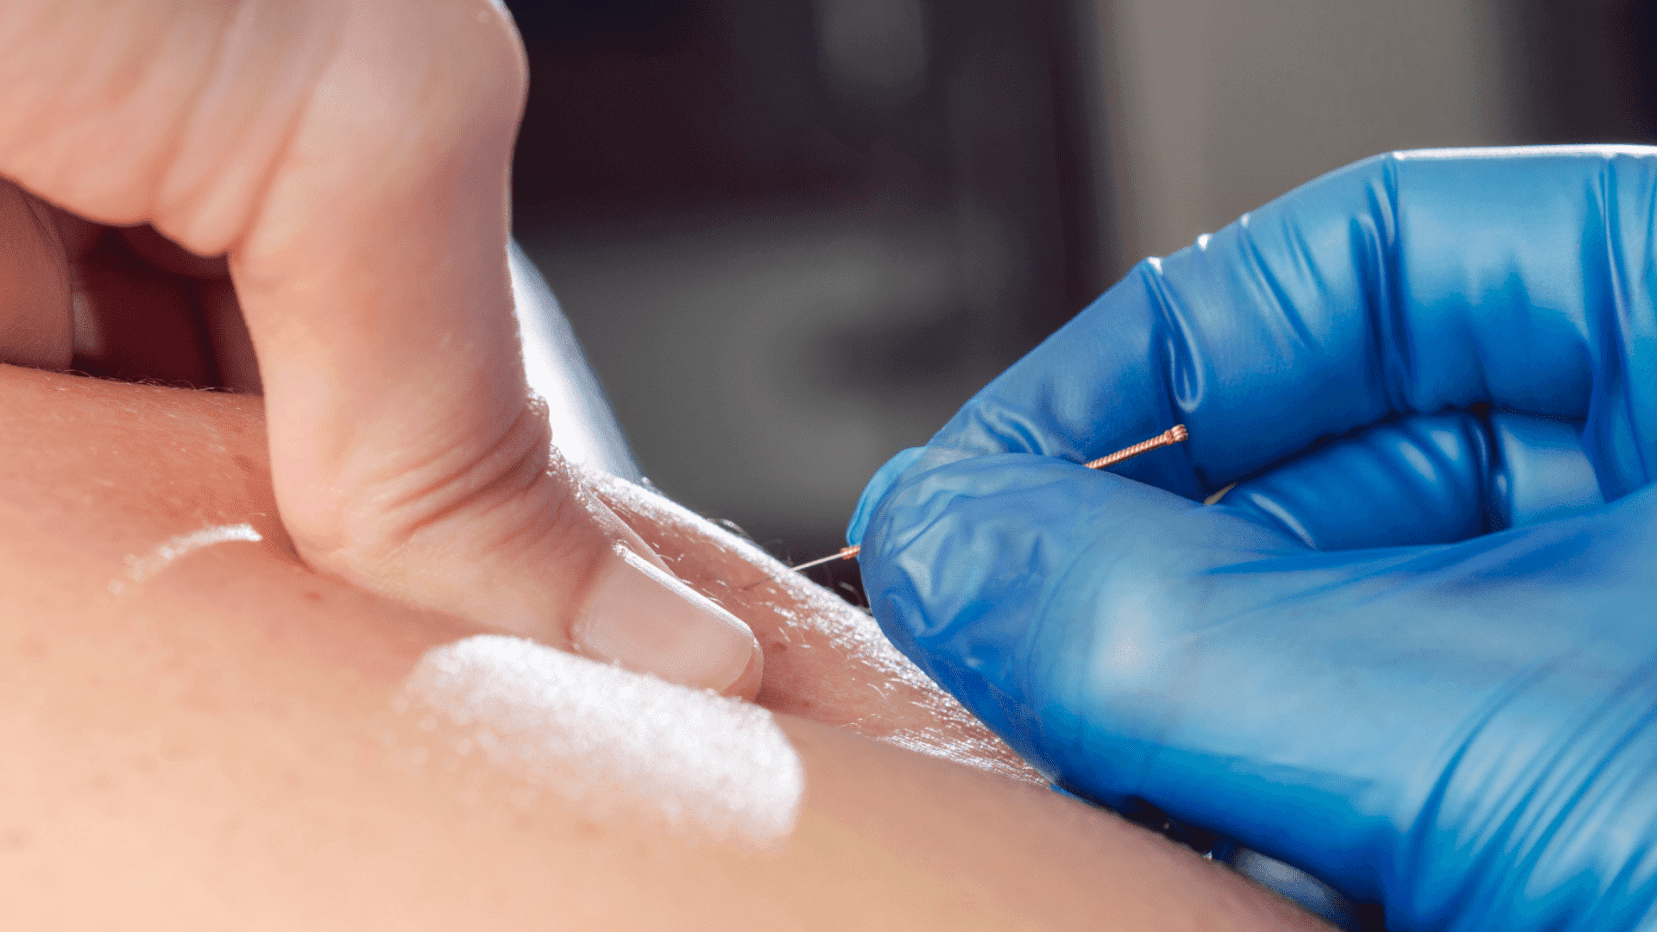 A close up of a blue goved hand placing a thin needle into the skin as part of a dry needling session